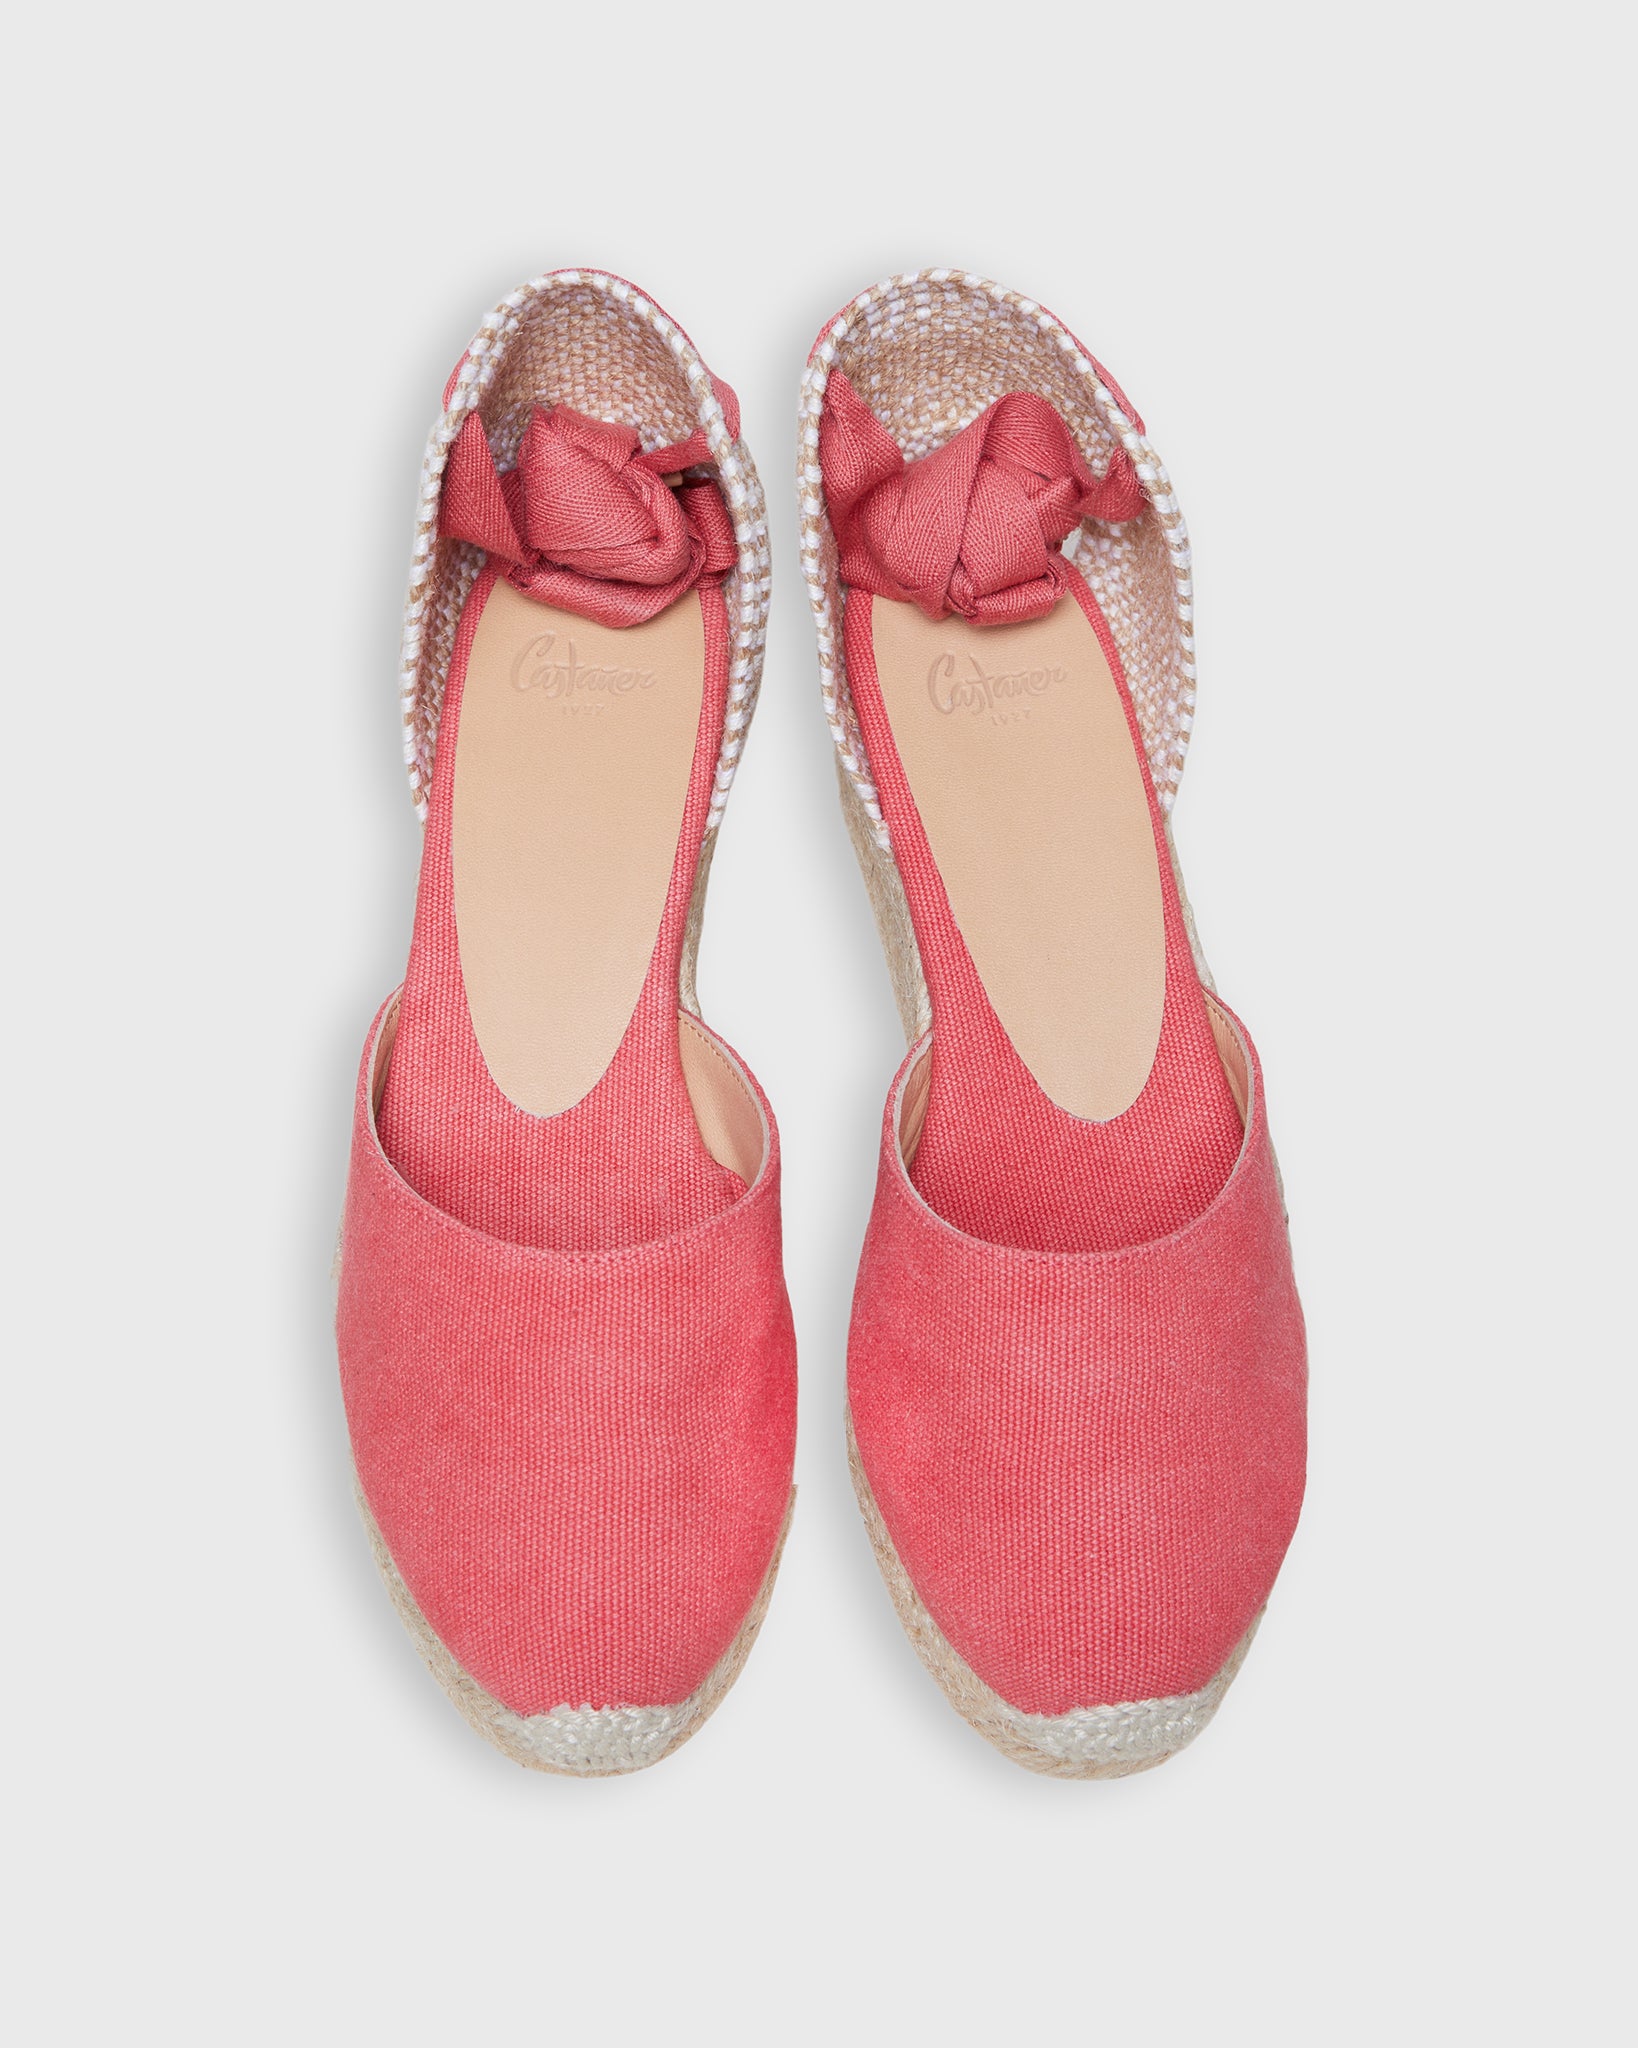 Extra Low Carina Espadrille in Radiant Canvas